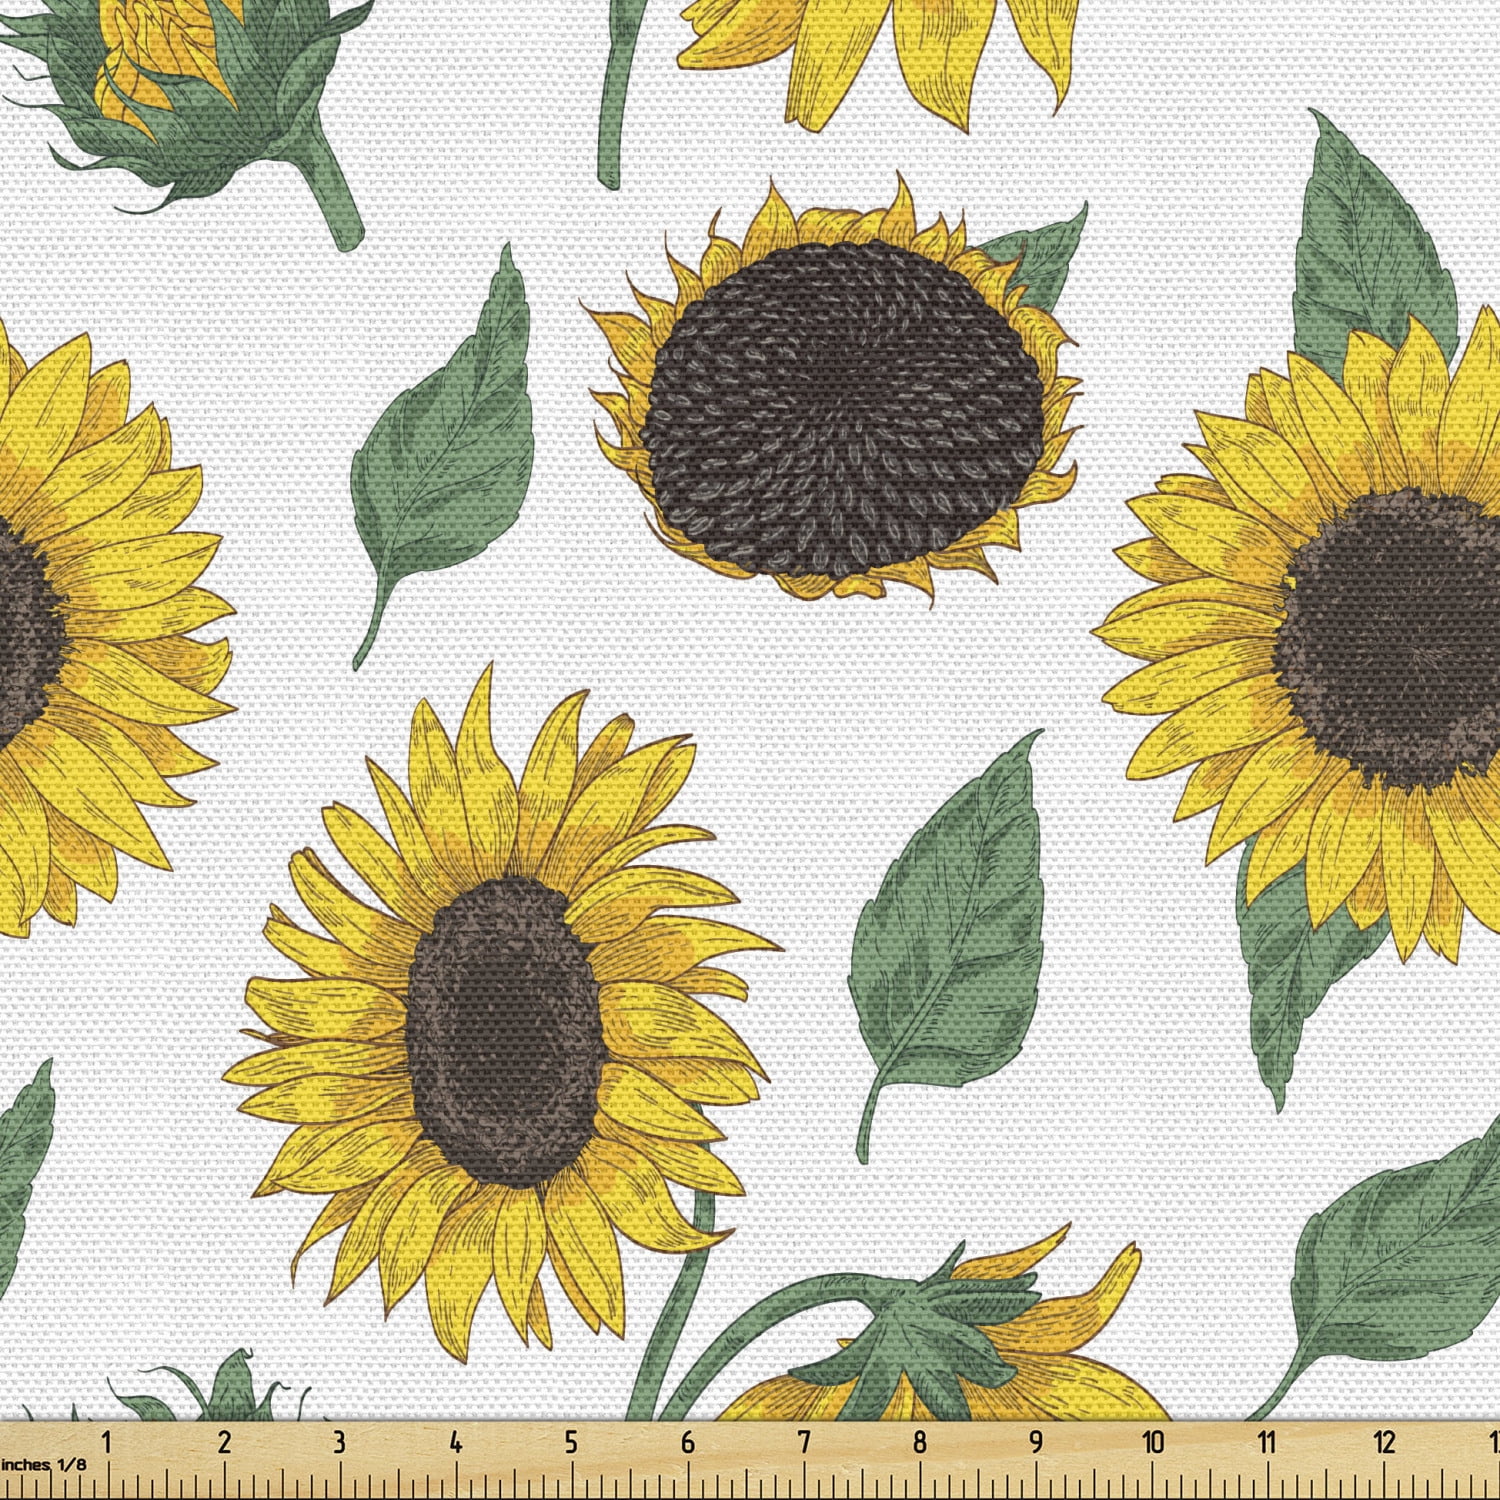 Printed fabric of your choice featuring Wild Yellow Sunflowers on Black Background Sunflower Fabric By the Yard